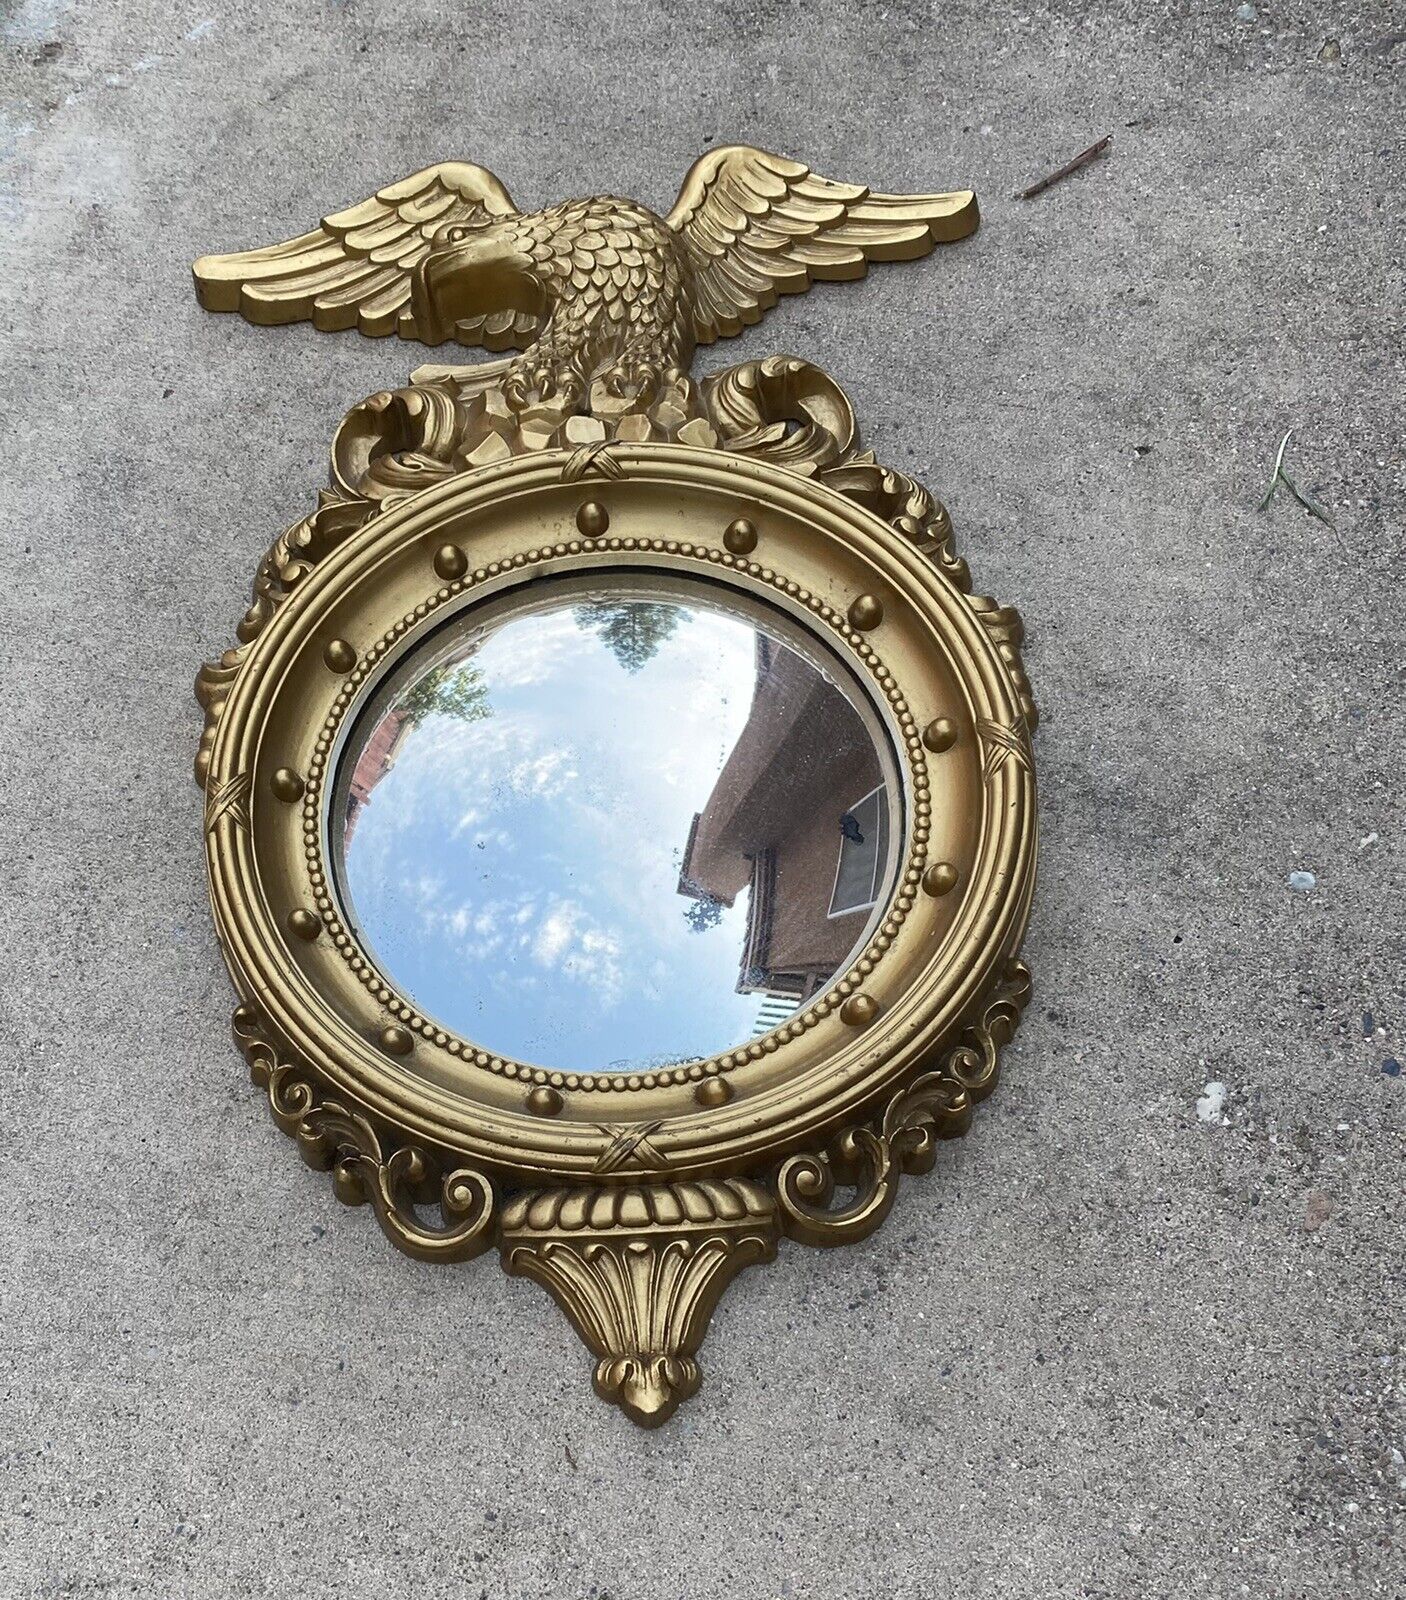 Antique Valuations: American Eagle Convex Federal Bullseye Wall Mirror 4410 21" H 15" W EXC